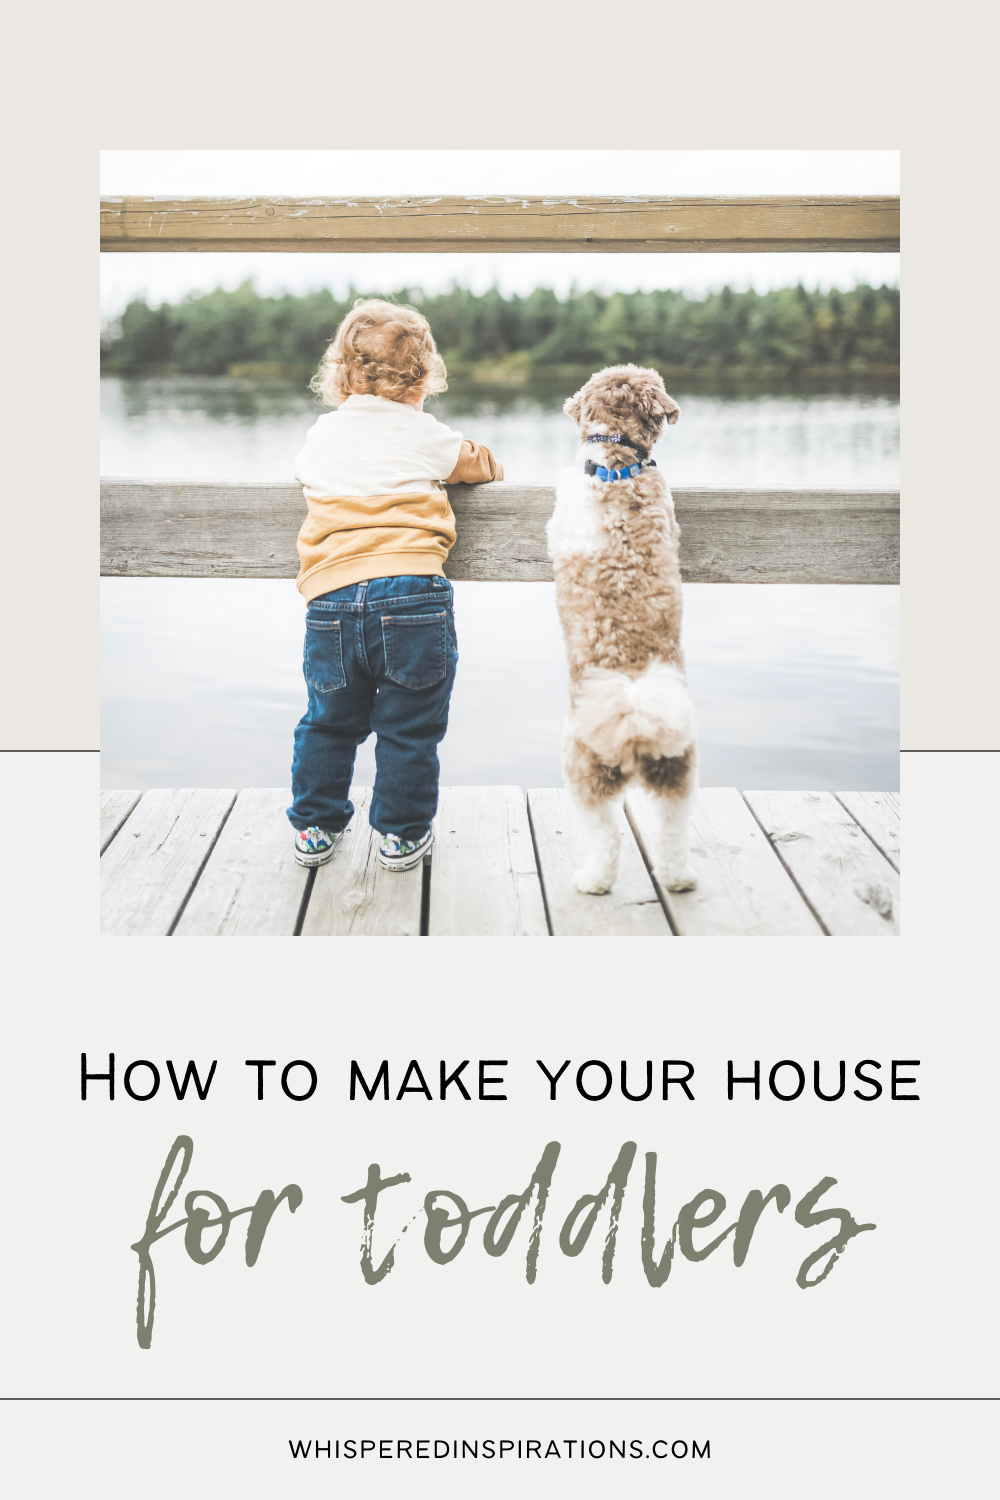 A curly-haired toddler and a Goldendoodle stand on a deck by a lake, back facing the camera. They look out to the lake together. This article covers how to make your house safer for toddlers.